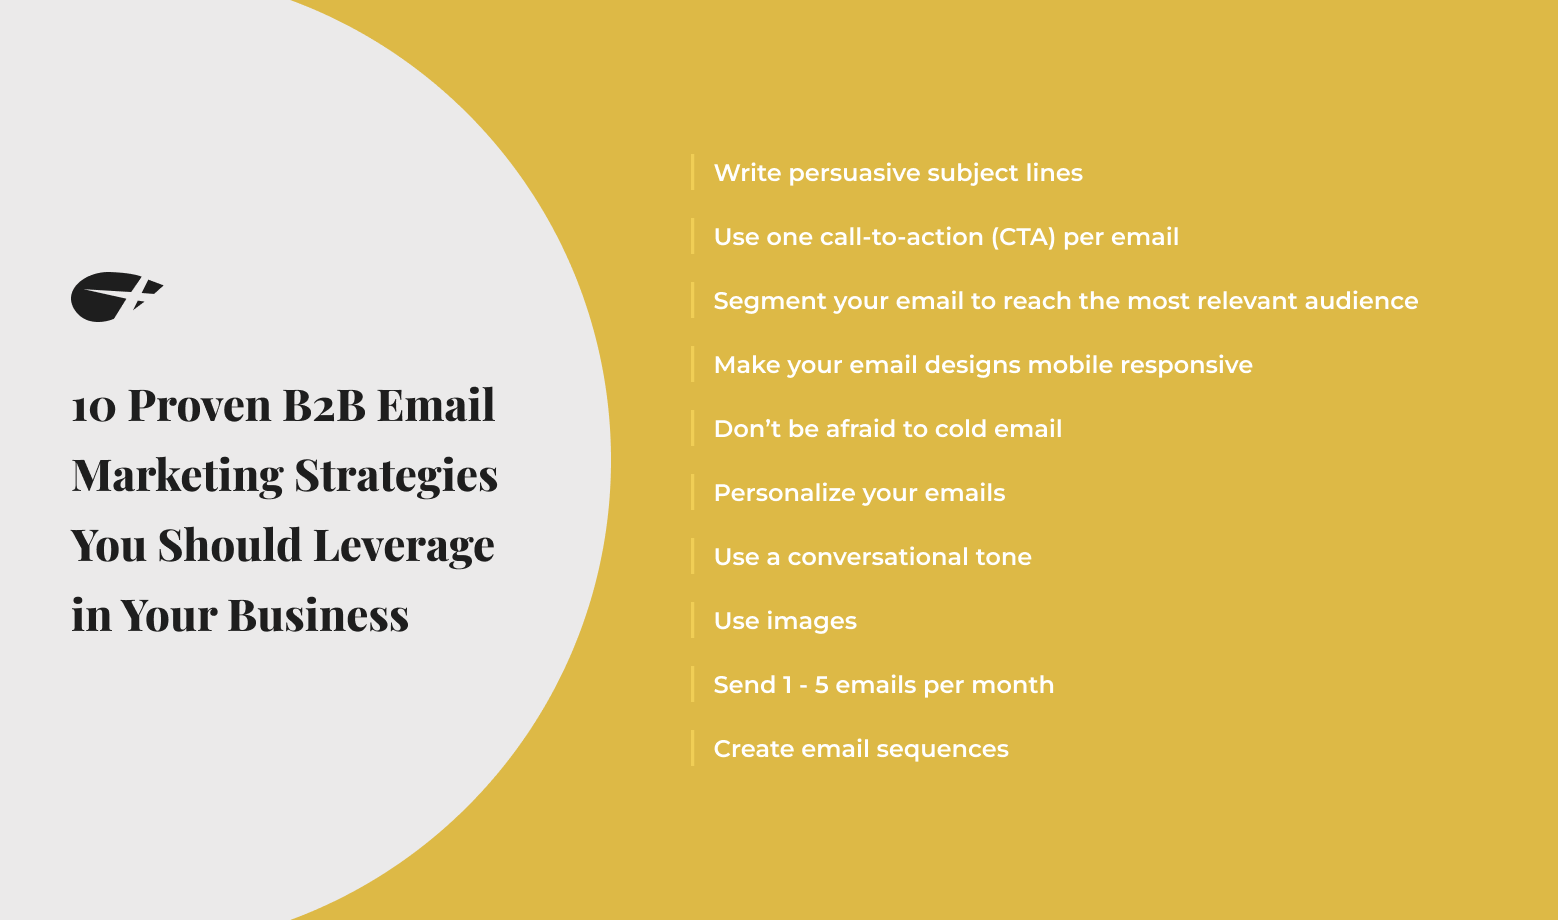 10 Proven B2B Email Marketing Strategies You Should Leverage in Your Business: Write persuasive subject lines, use one call-to-action per email, segment your email to reach the most relevant audience, mak you email designs mobile responsive, don't be afraid to cold email, personalize your emails, use a conversational tone, use images, send 1-5 emails per month, and create email sequences.